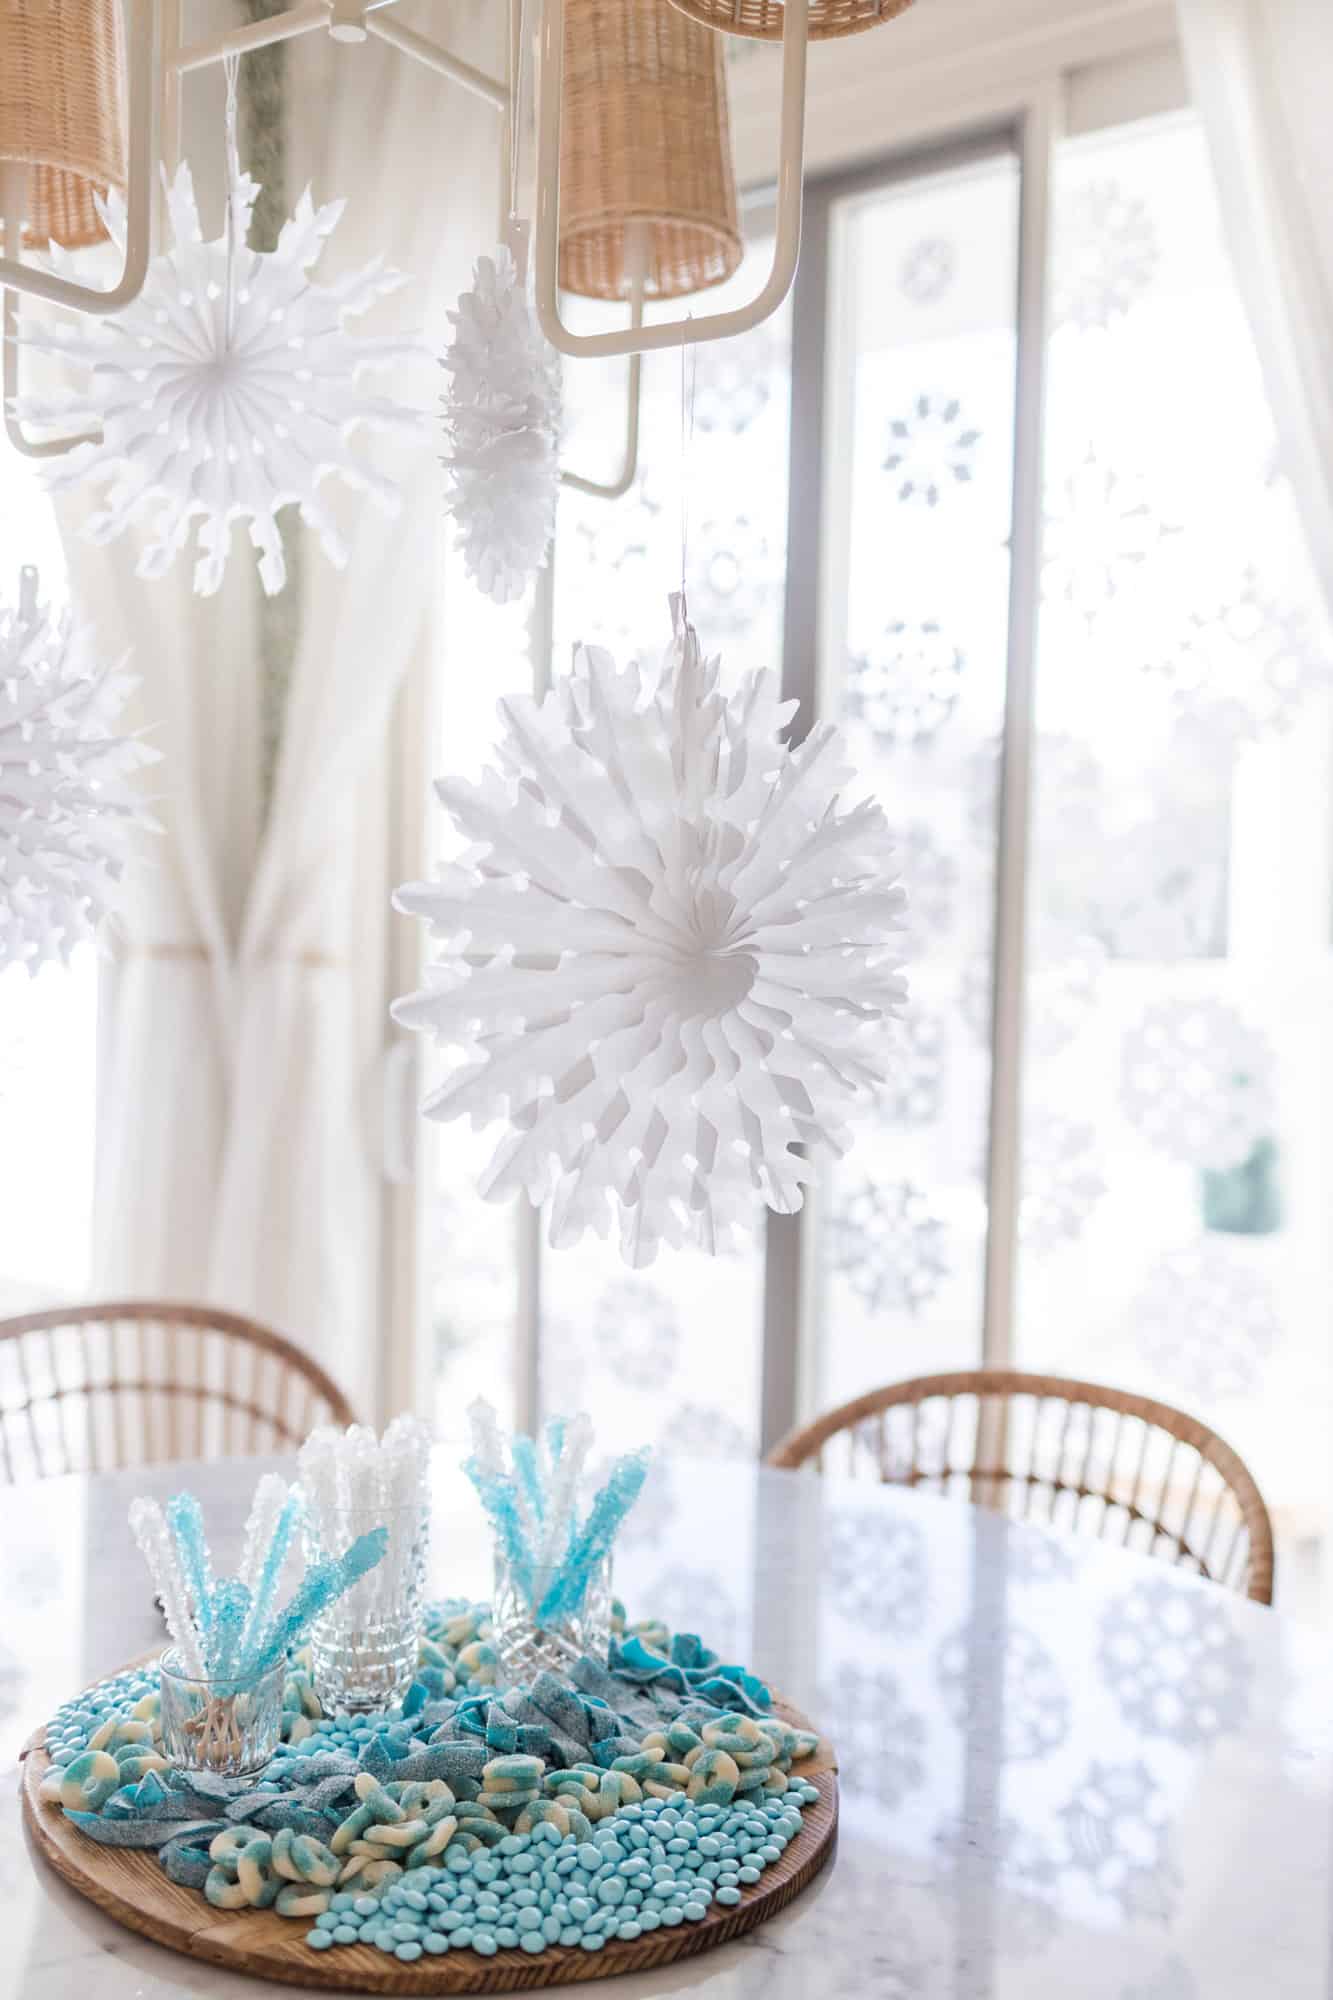 paper snowflakes hanging above a candy tray